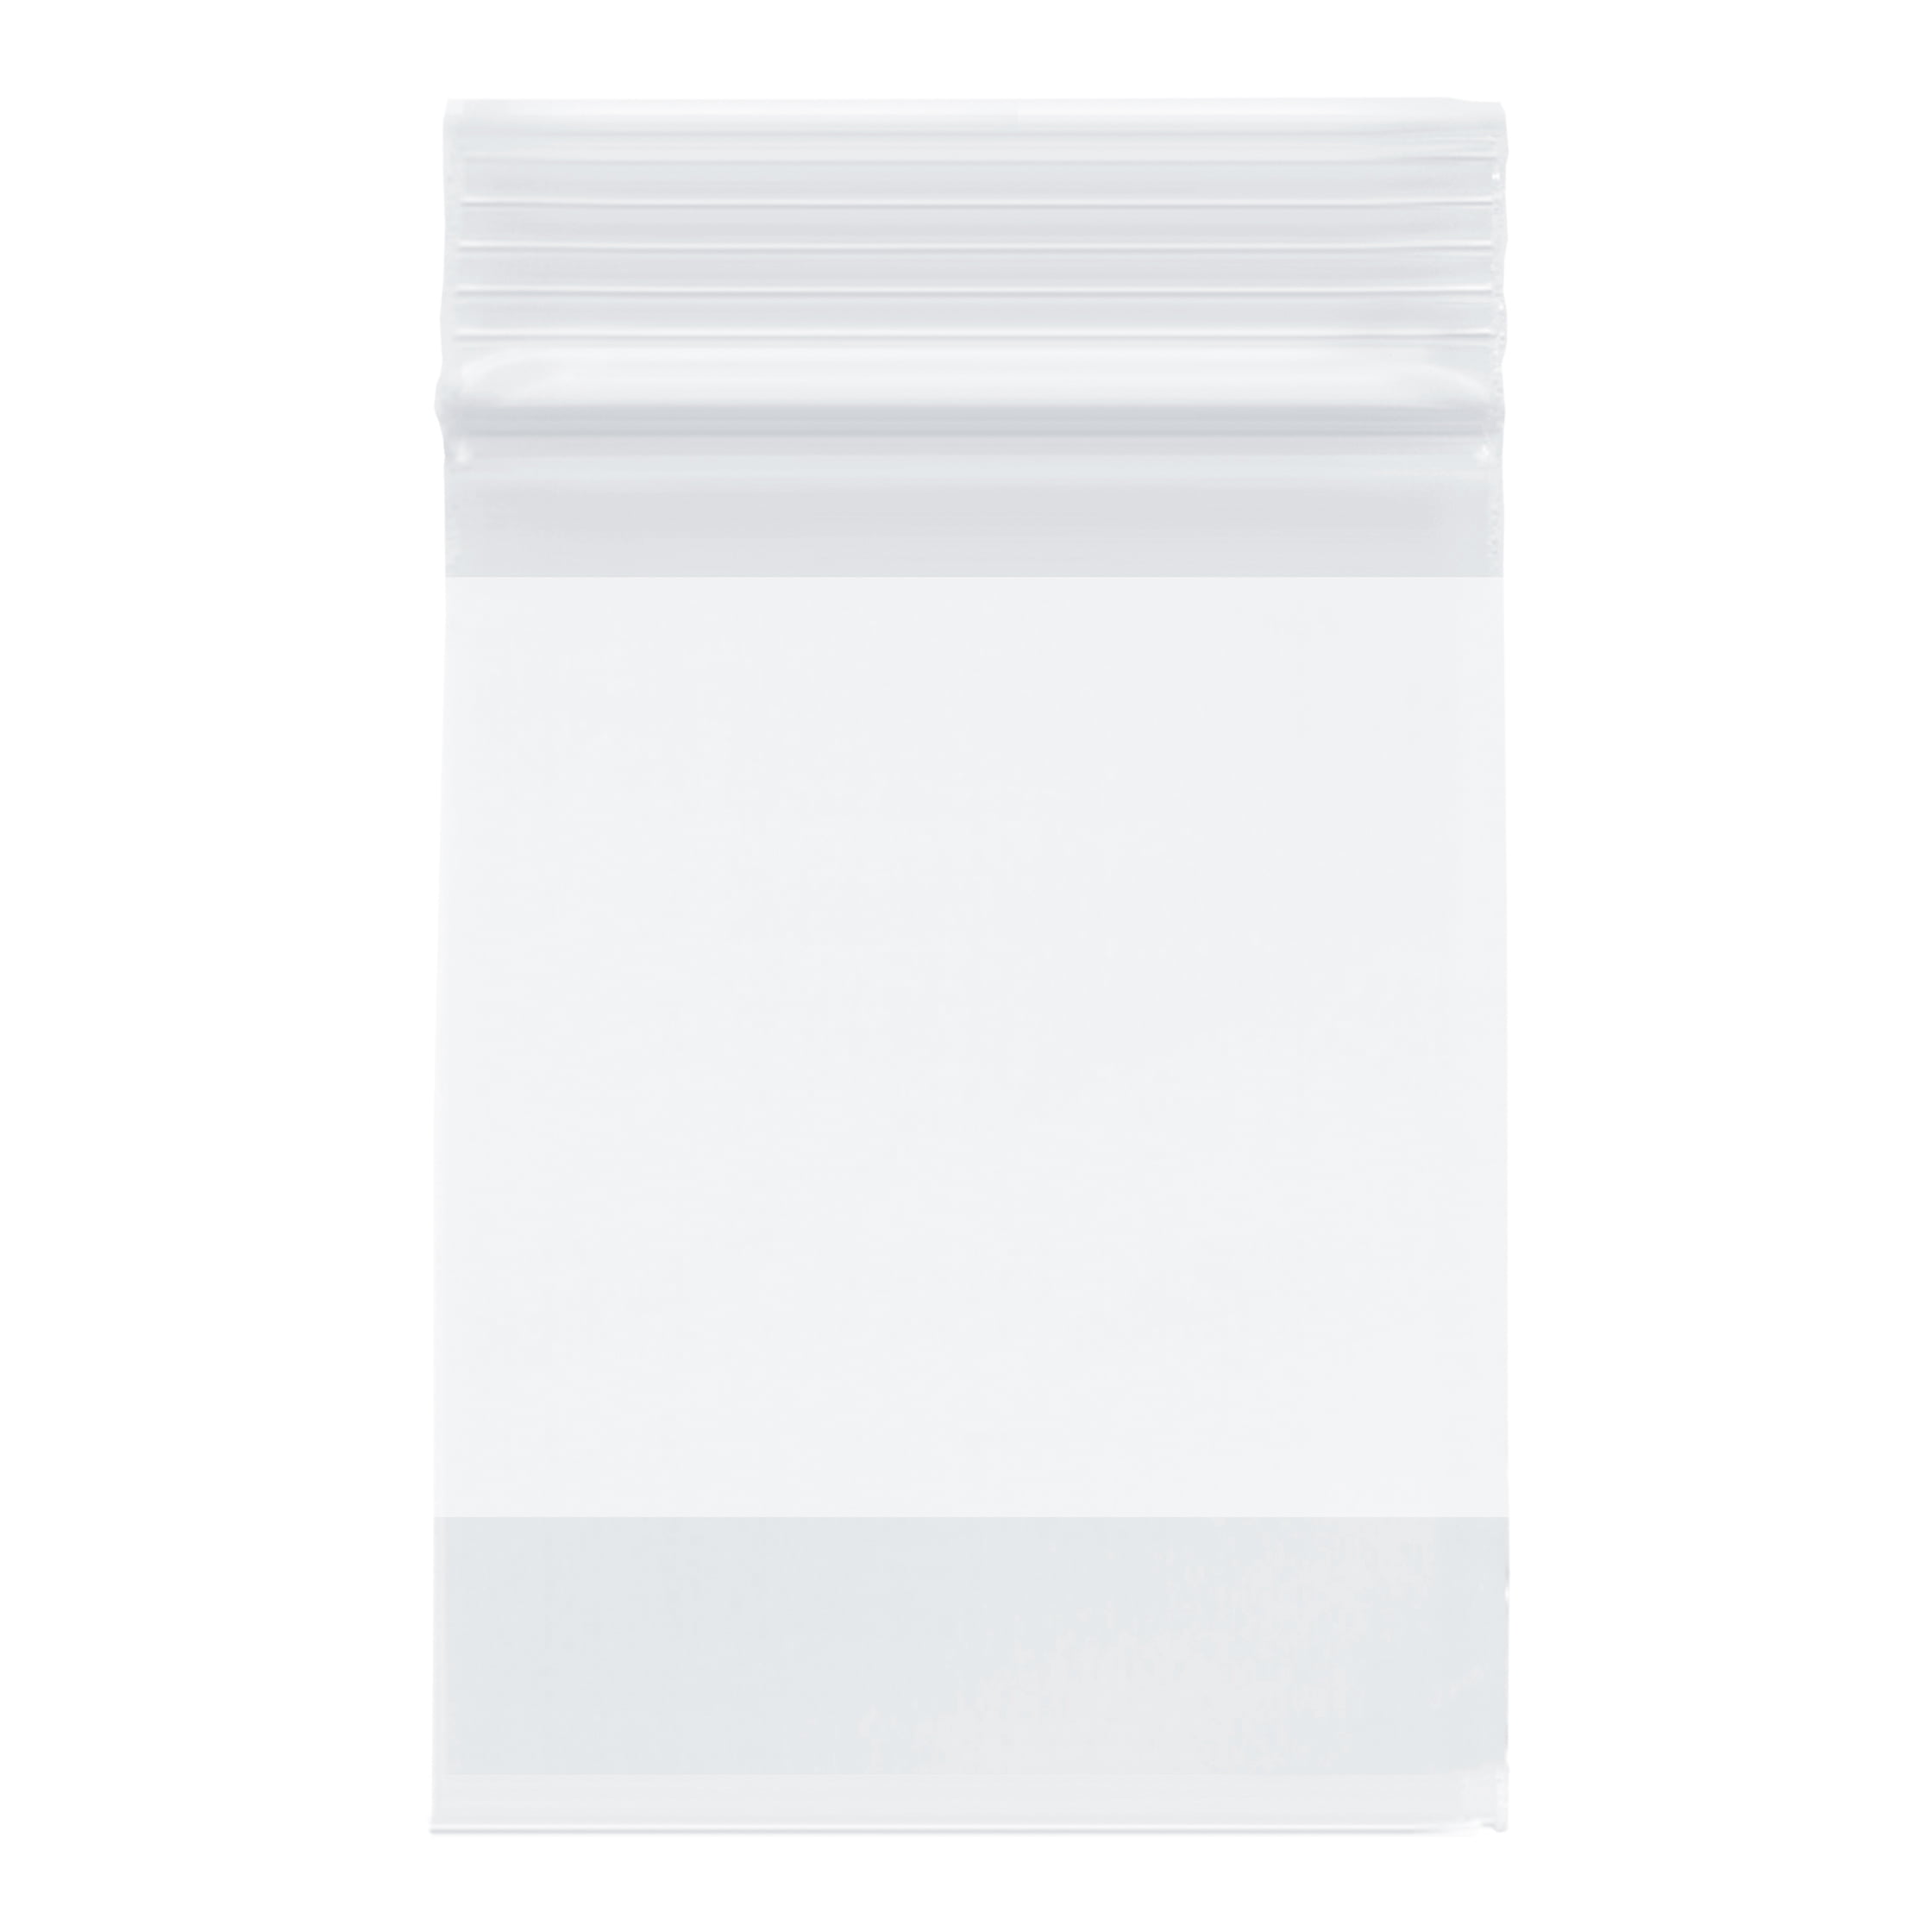 2 x 3 Storage Ziplock Bags with Whiteblock 4 Mil Clear Plastic Bag with Zipper 200 Count 